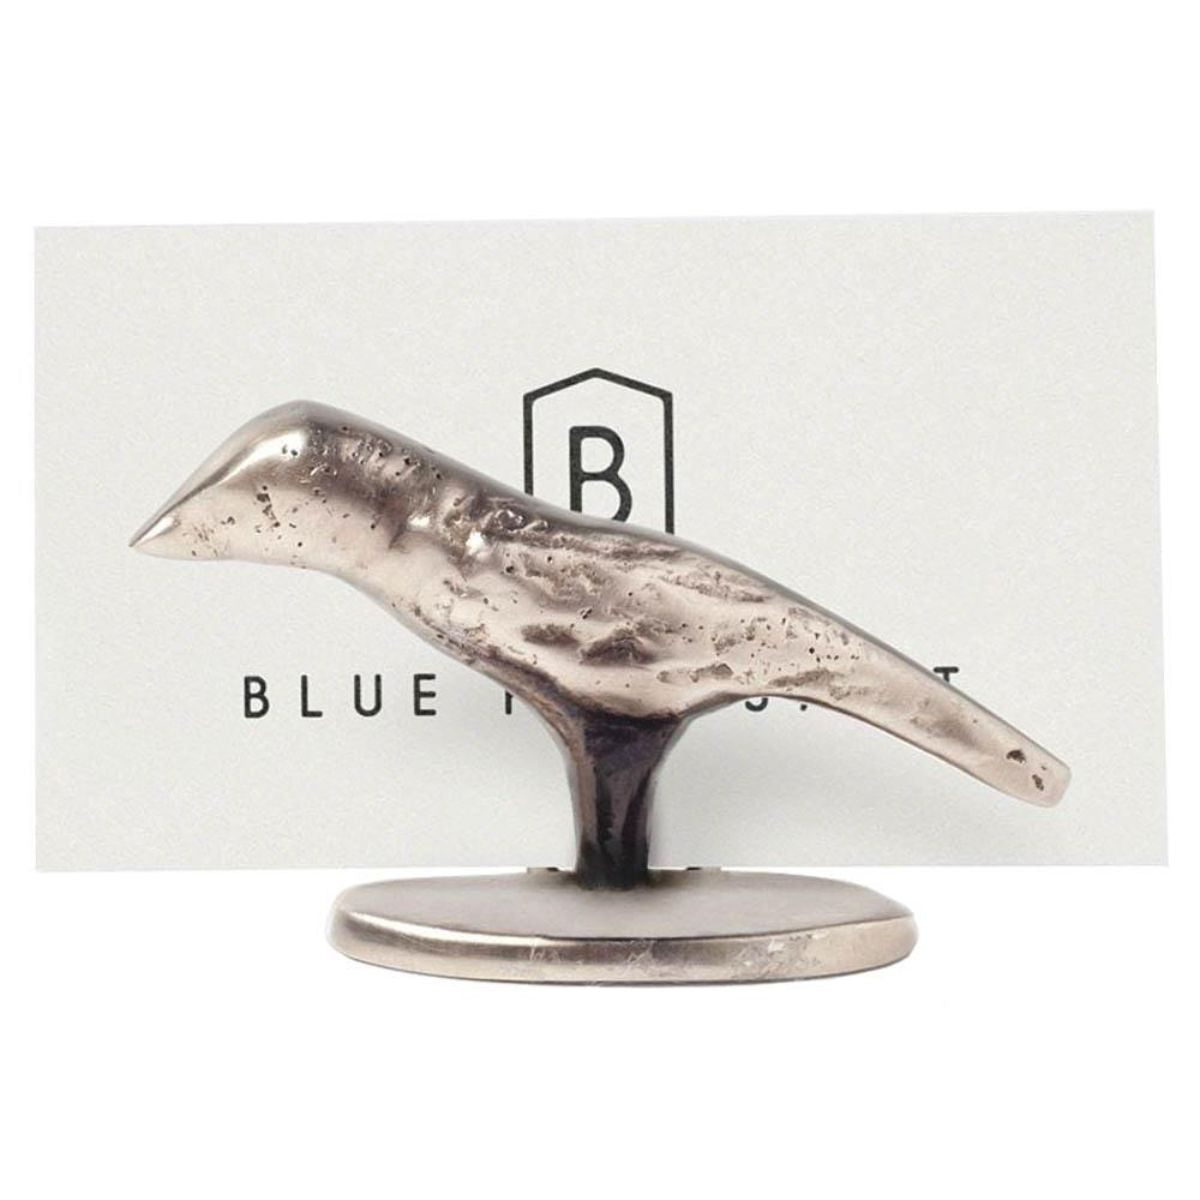 Tarnished Silver Bird Card Holders, Set of 4